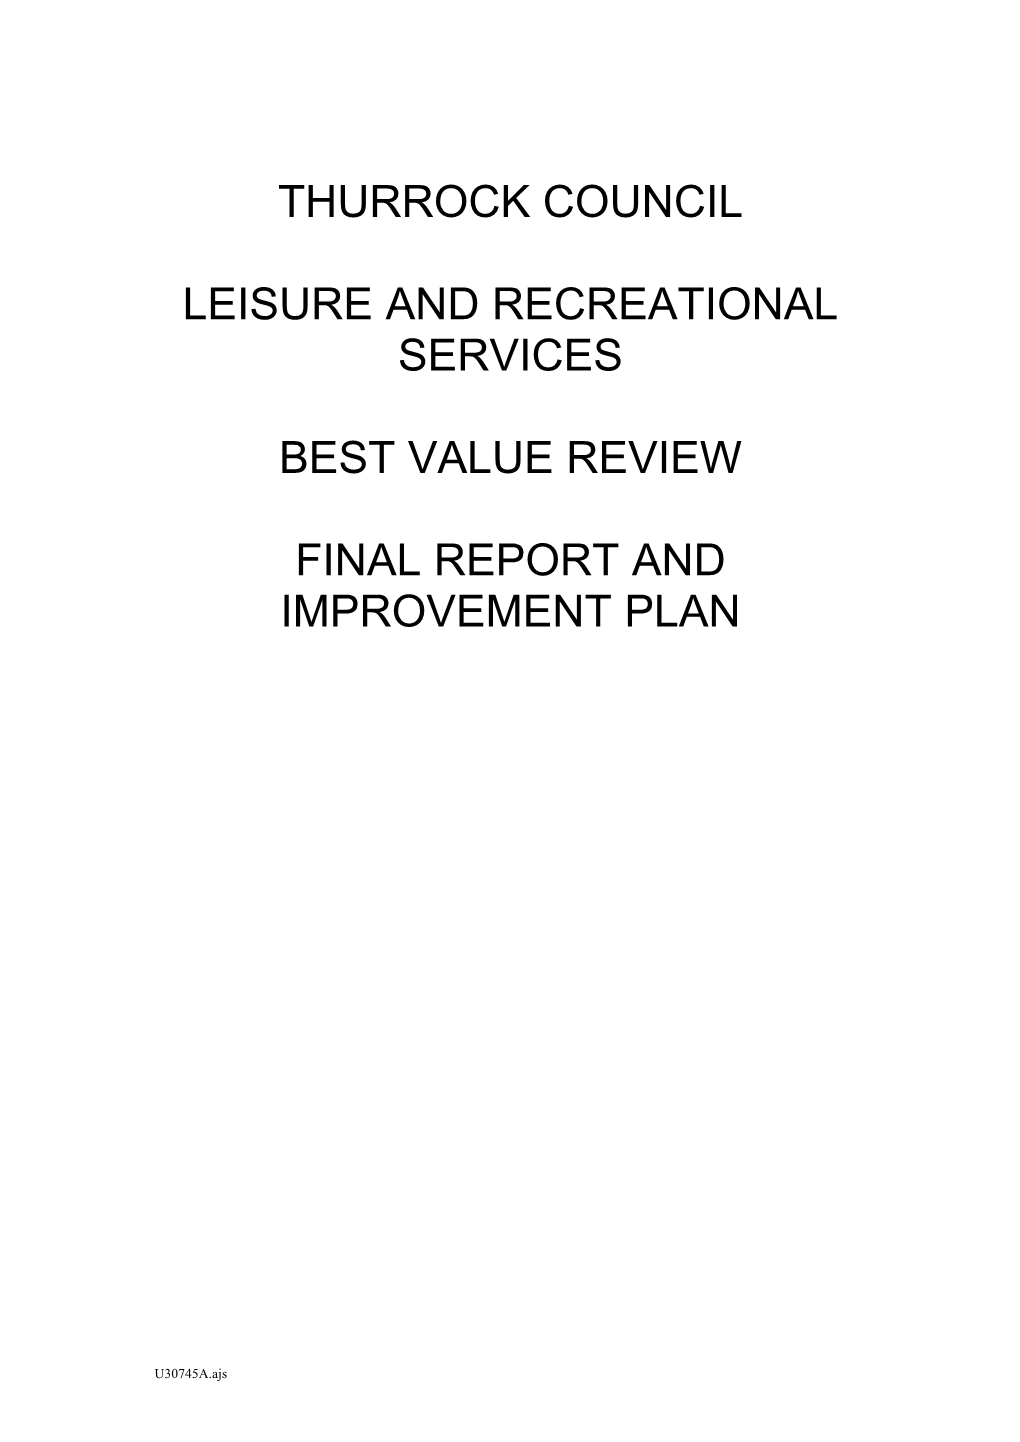 Thurrock Council Leisure and Recreational Services Best Value Review Final Report and Improvement Plan